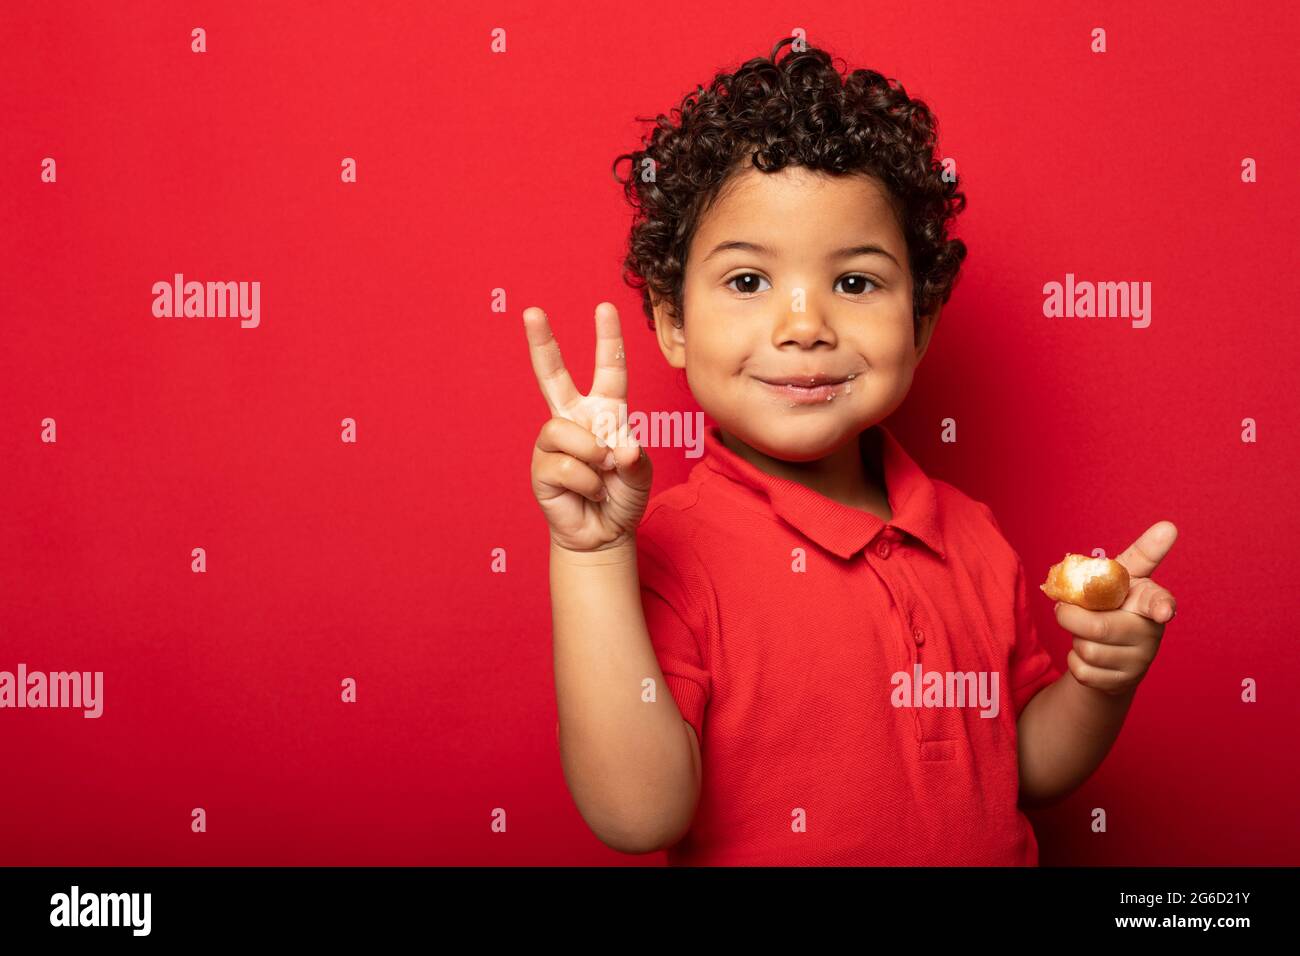 Adorable child eating delicious doughnut and showing V sign while looking at camera on red background in studio Stock Photo